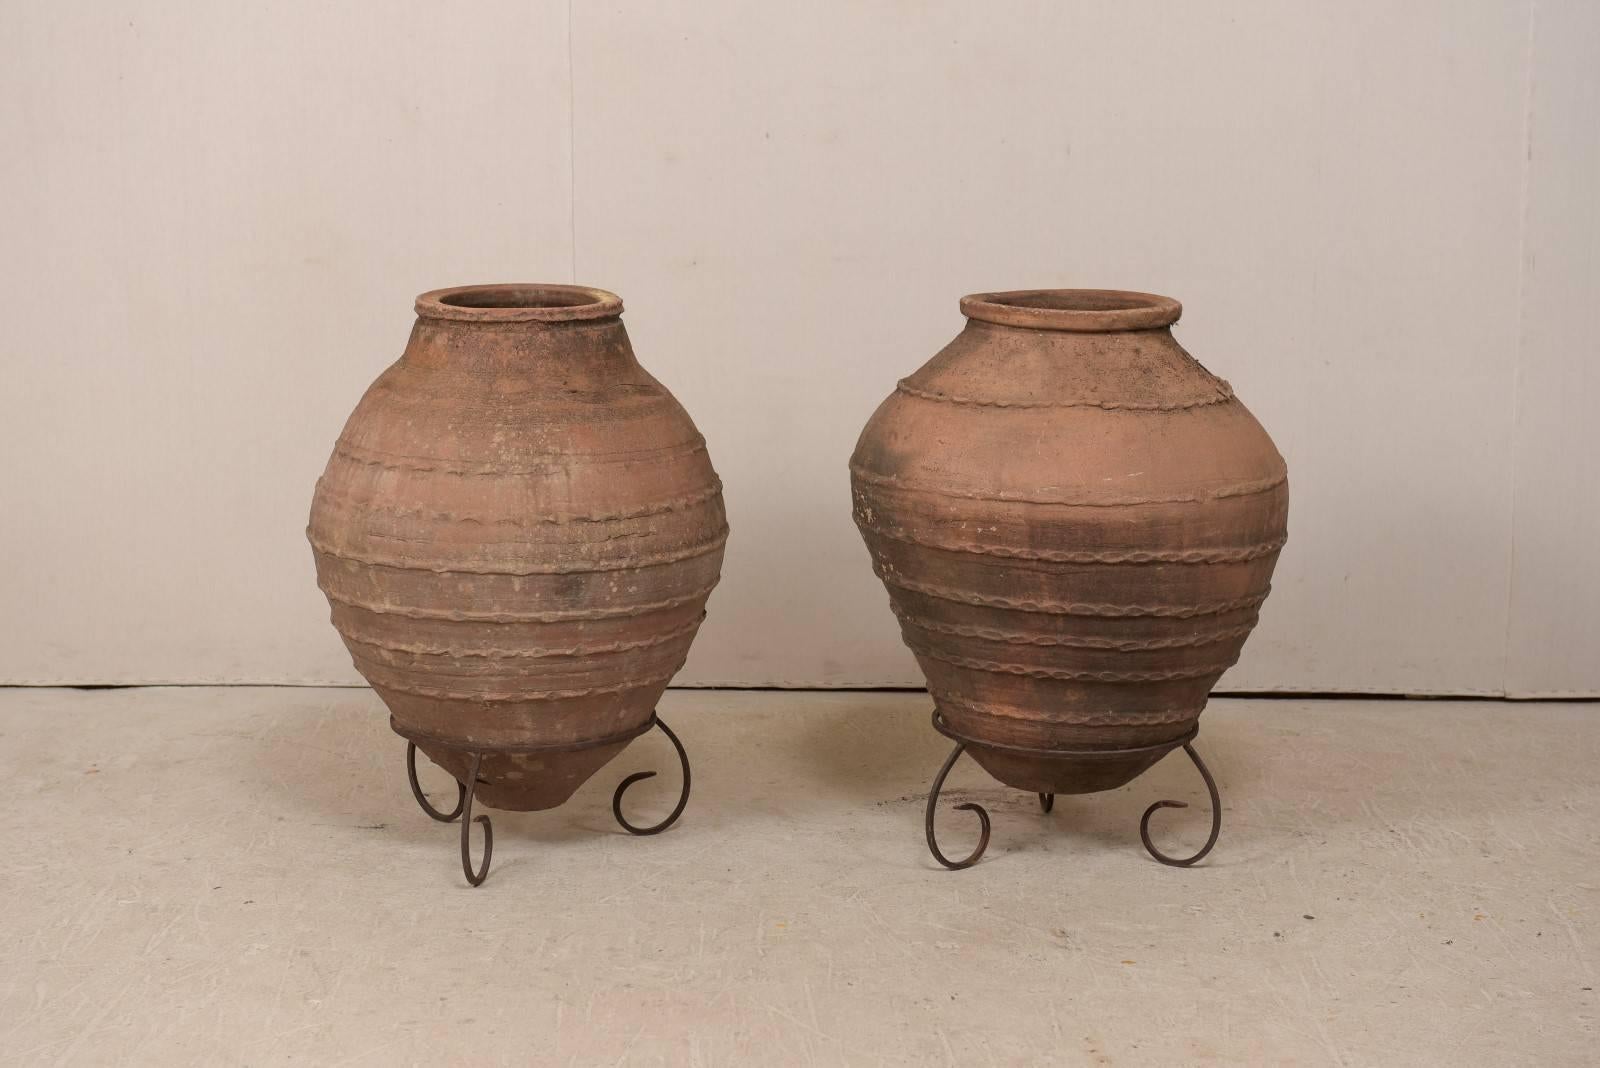 A pair of antique Turkish olive jars on custom stands. This pair of antique Turkish vessels, from the early 20th century, were once used to hold olives. These rounded terracotta vessels have bulbous centers which taper to their bottoms, and are